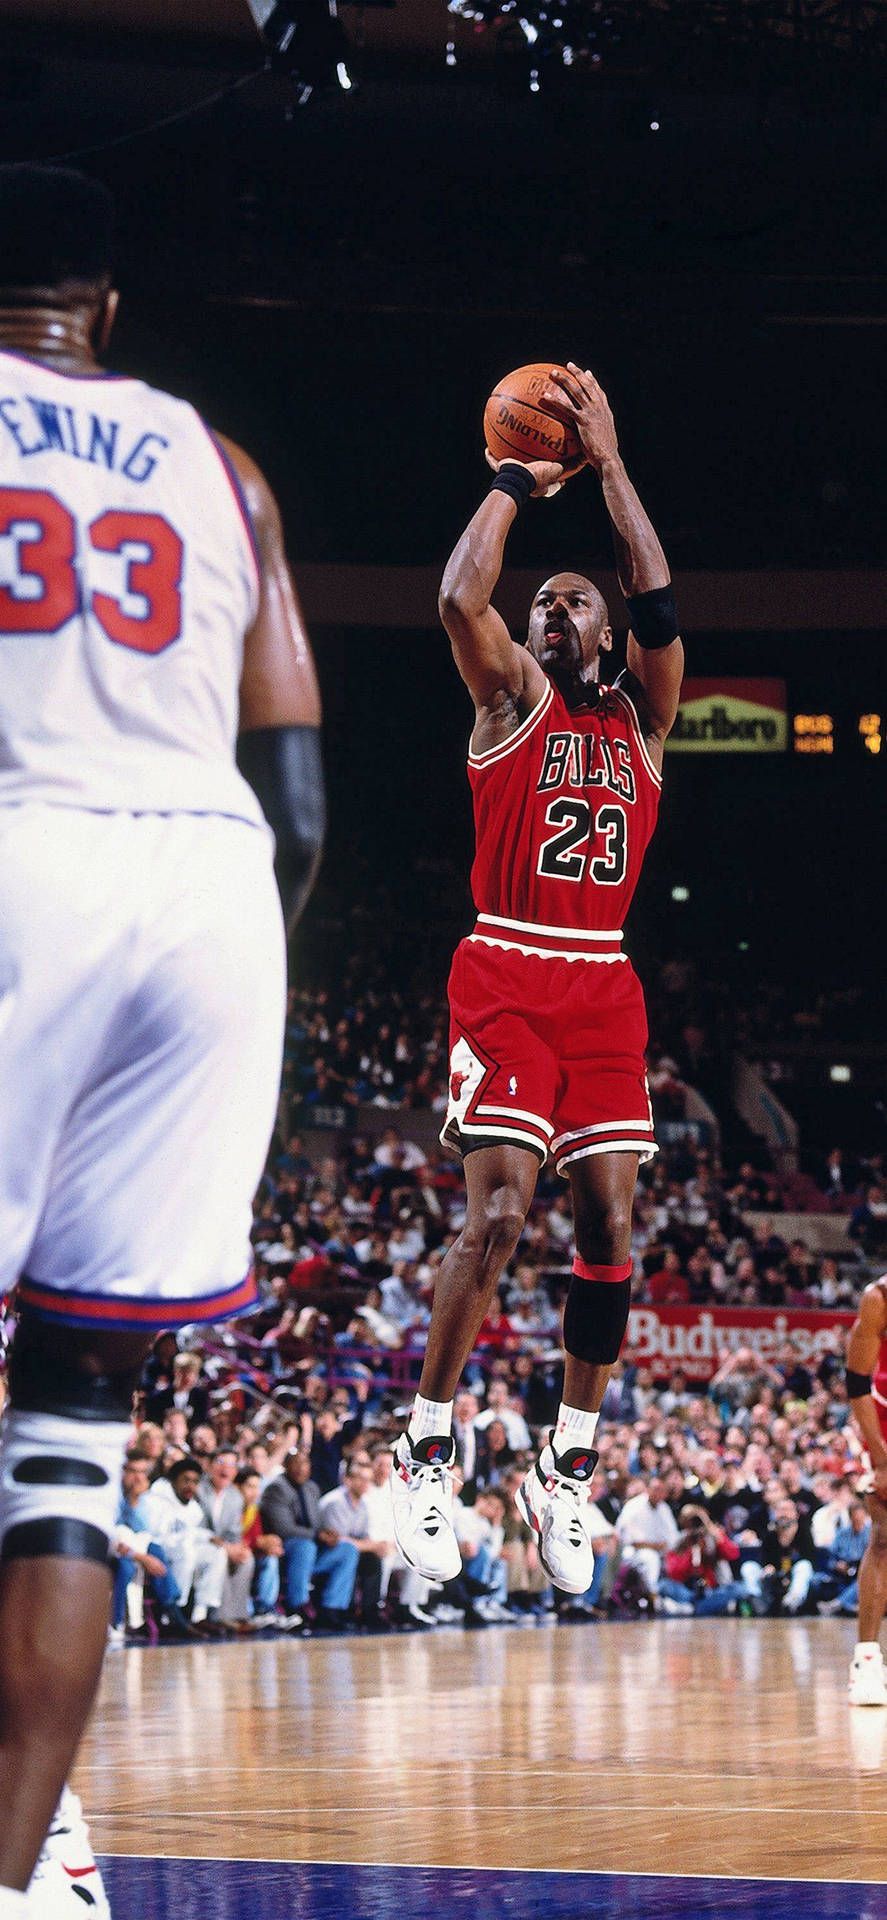 Jordan in red jersey and black wristband shoots the ball - NBA